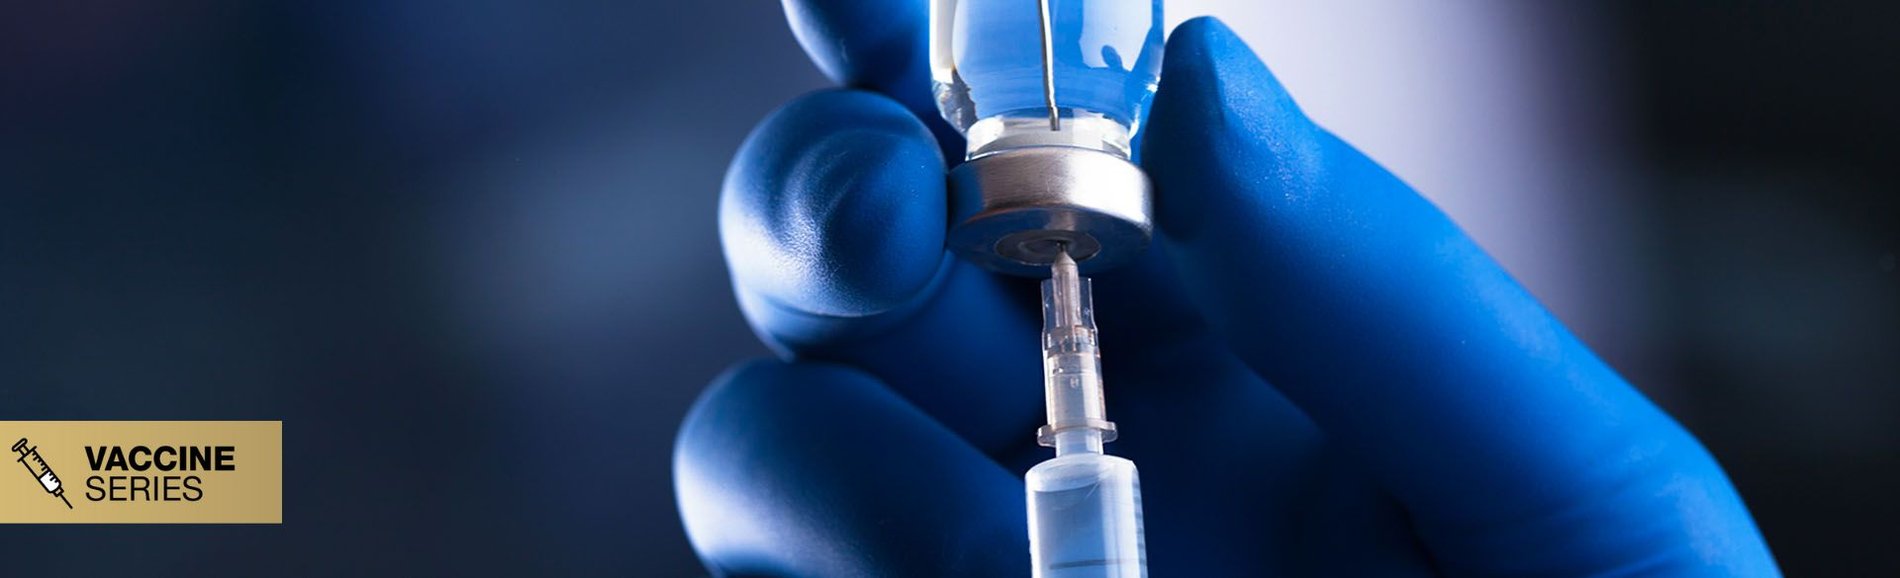 Blue-gloved hand extracting vaccine via needle from vial